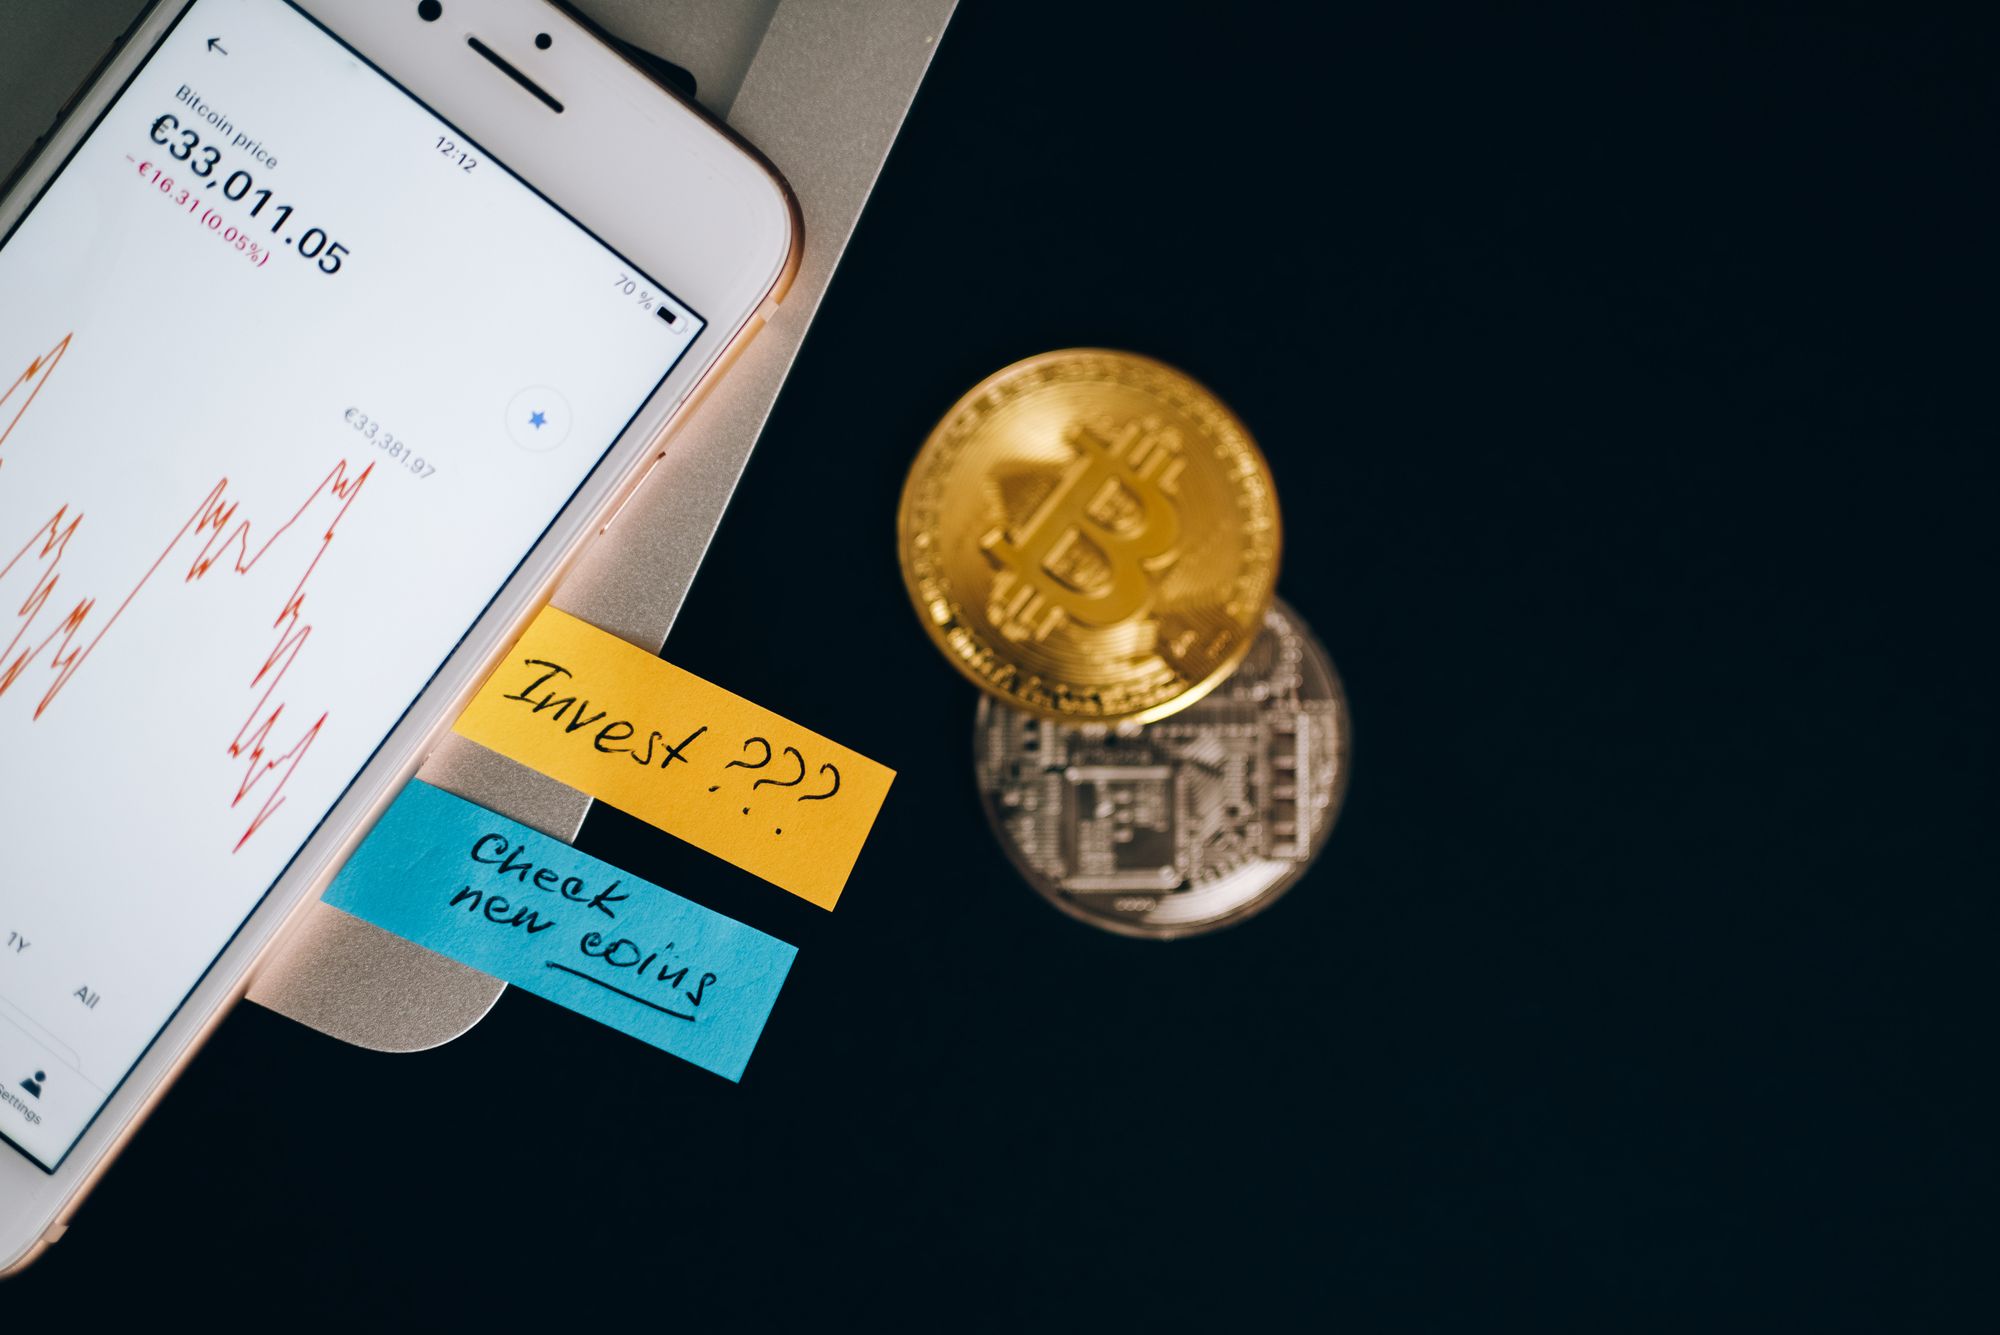 A phone screen with bitcoin price on it next to two paper strips, a bitcoin and another coin.